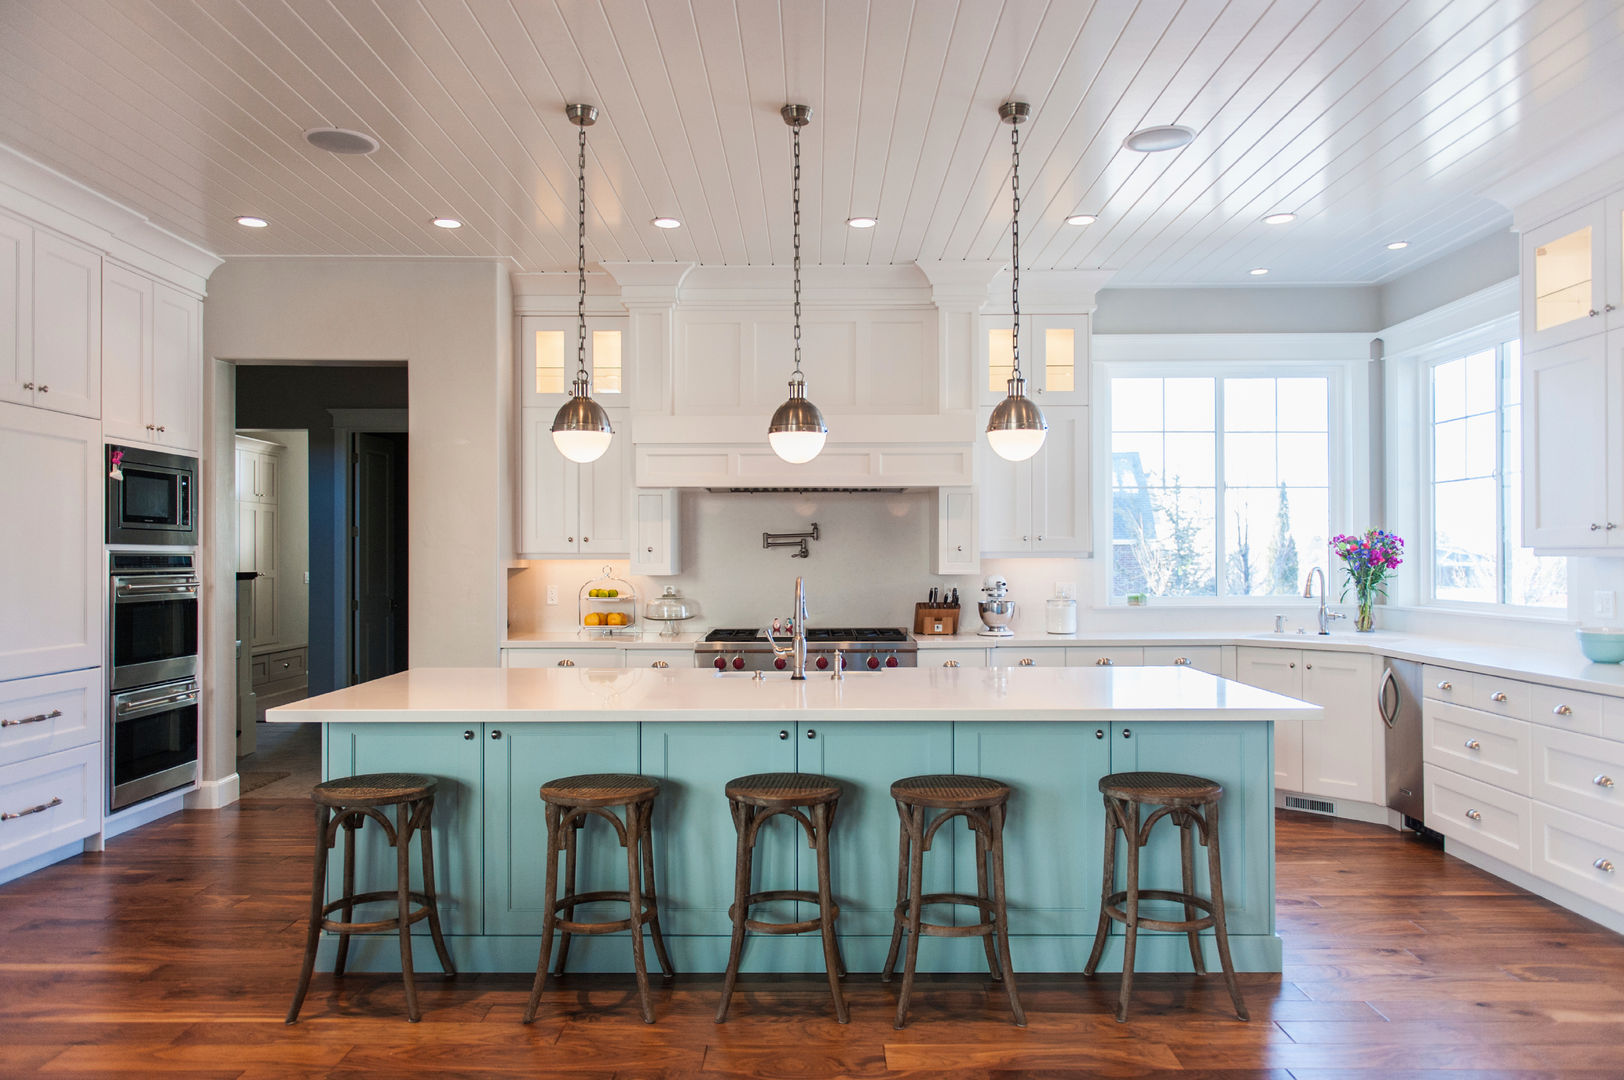 Modern Country-Style Kitchen Gracious Luxury Interiors 廚房 Country,Kitchen,Kitchen Island,Pastel,Blue,Barn,Barn Conversion